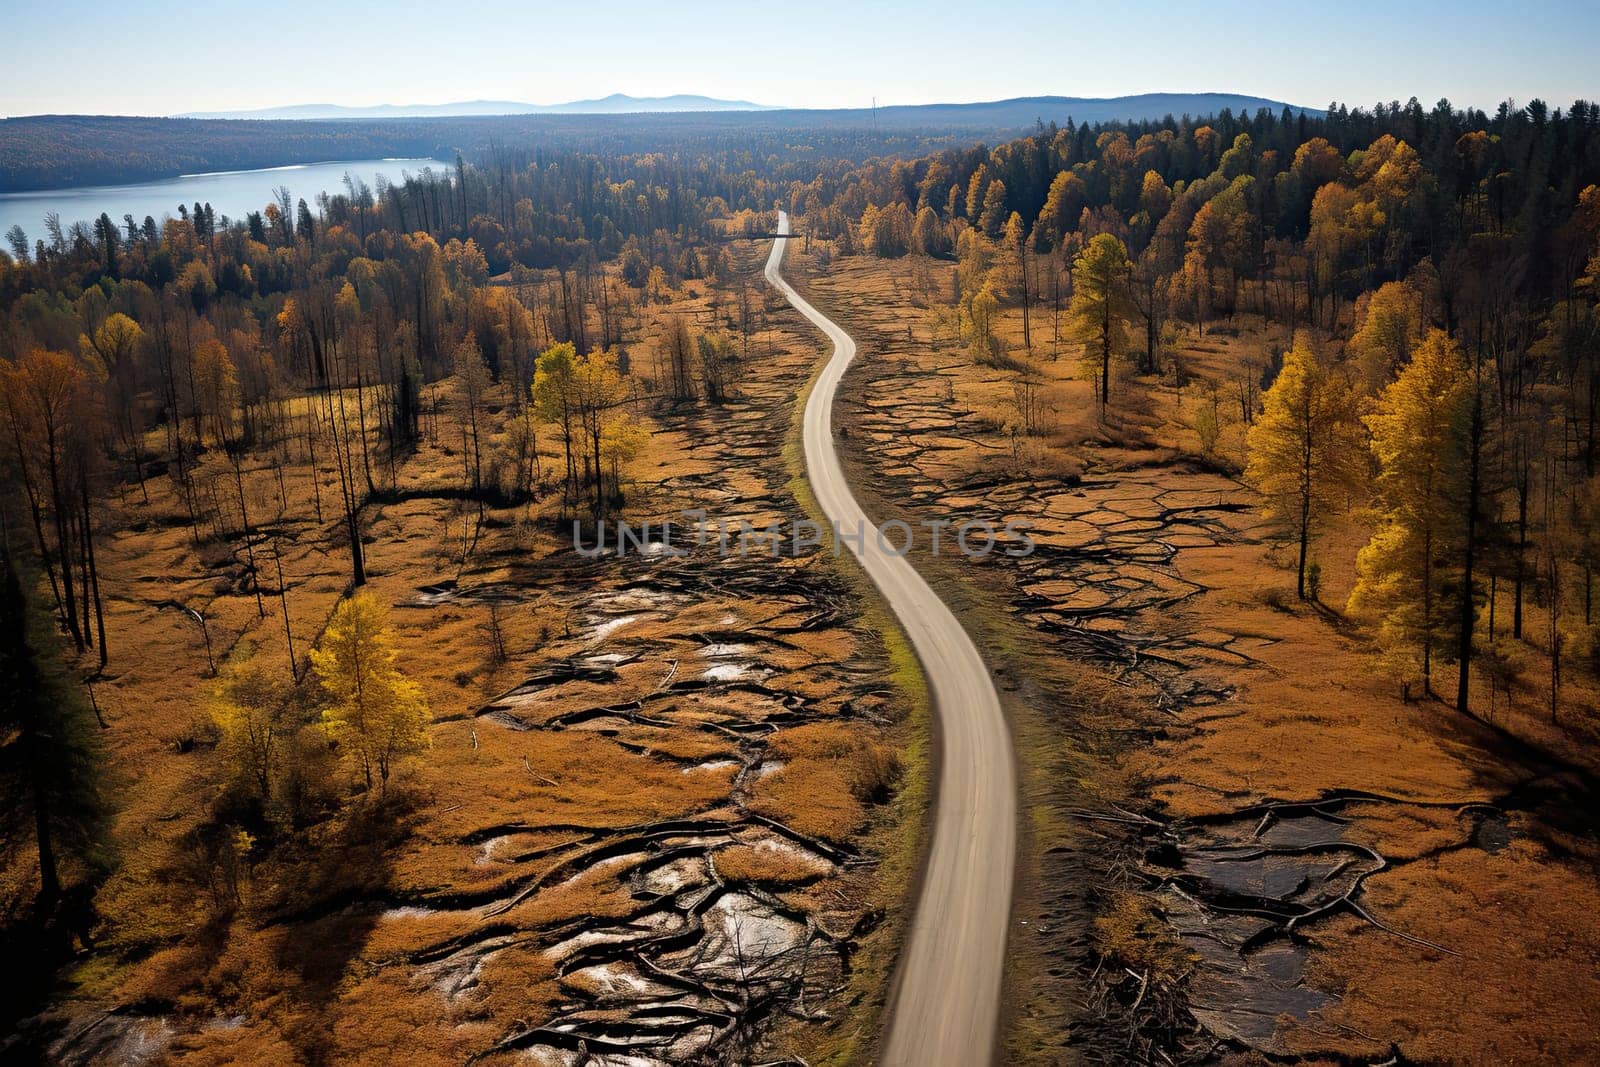 an aerial view of a road in the middle of a forest with trees and rocks on both sides, as seen from above